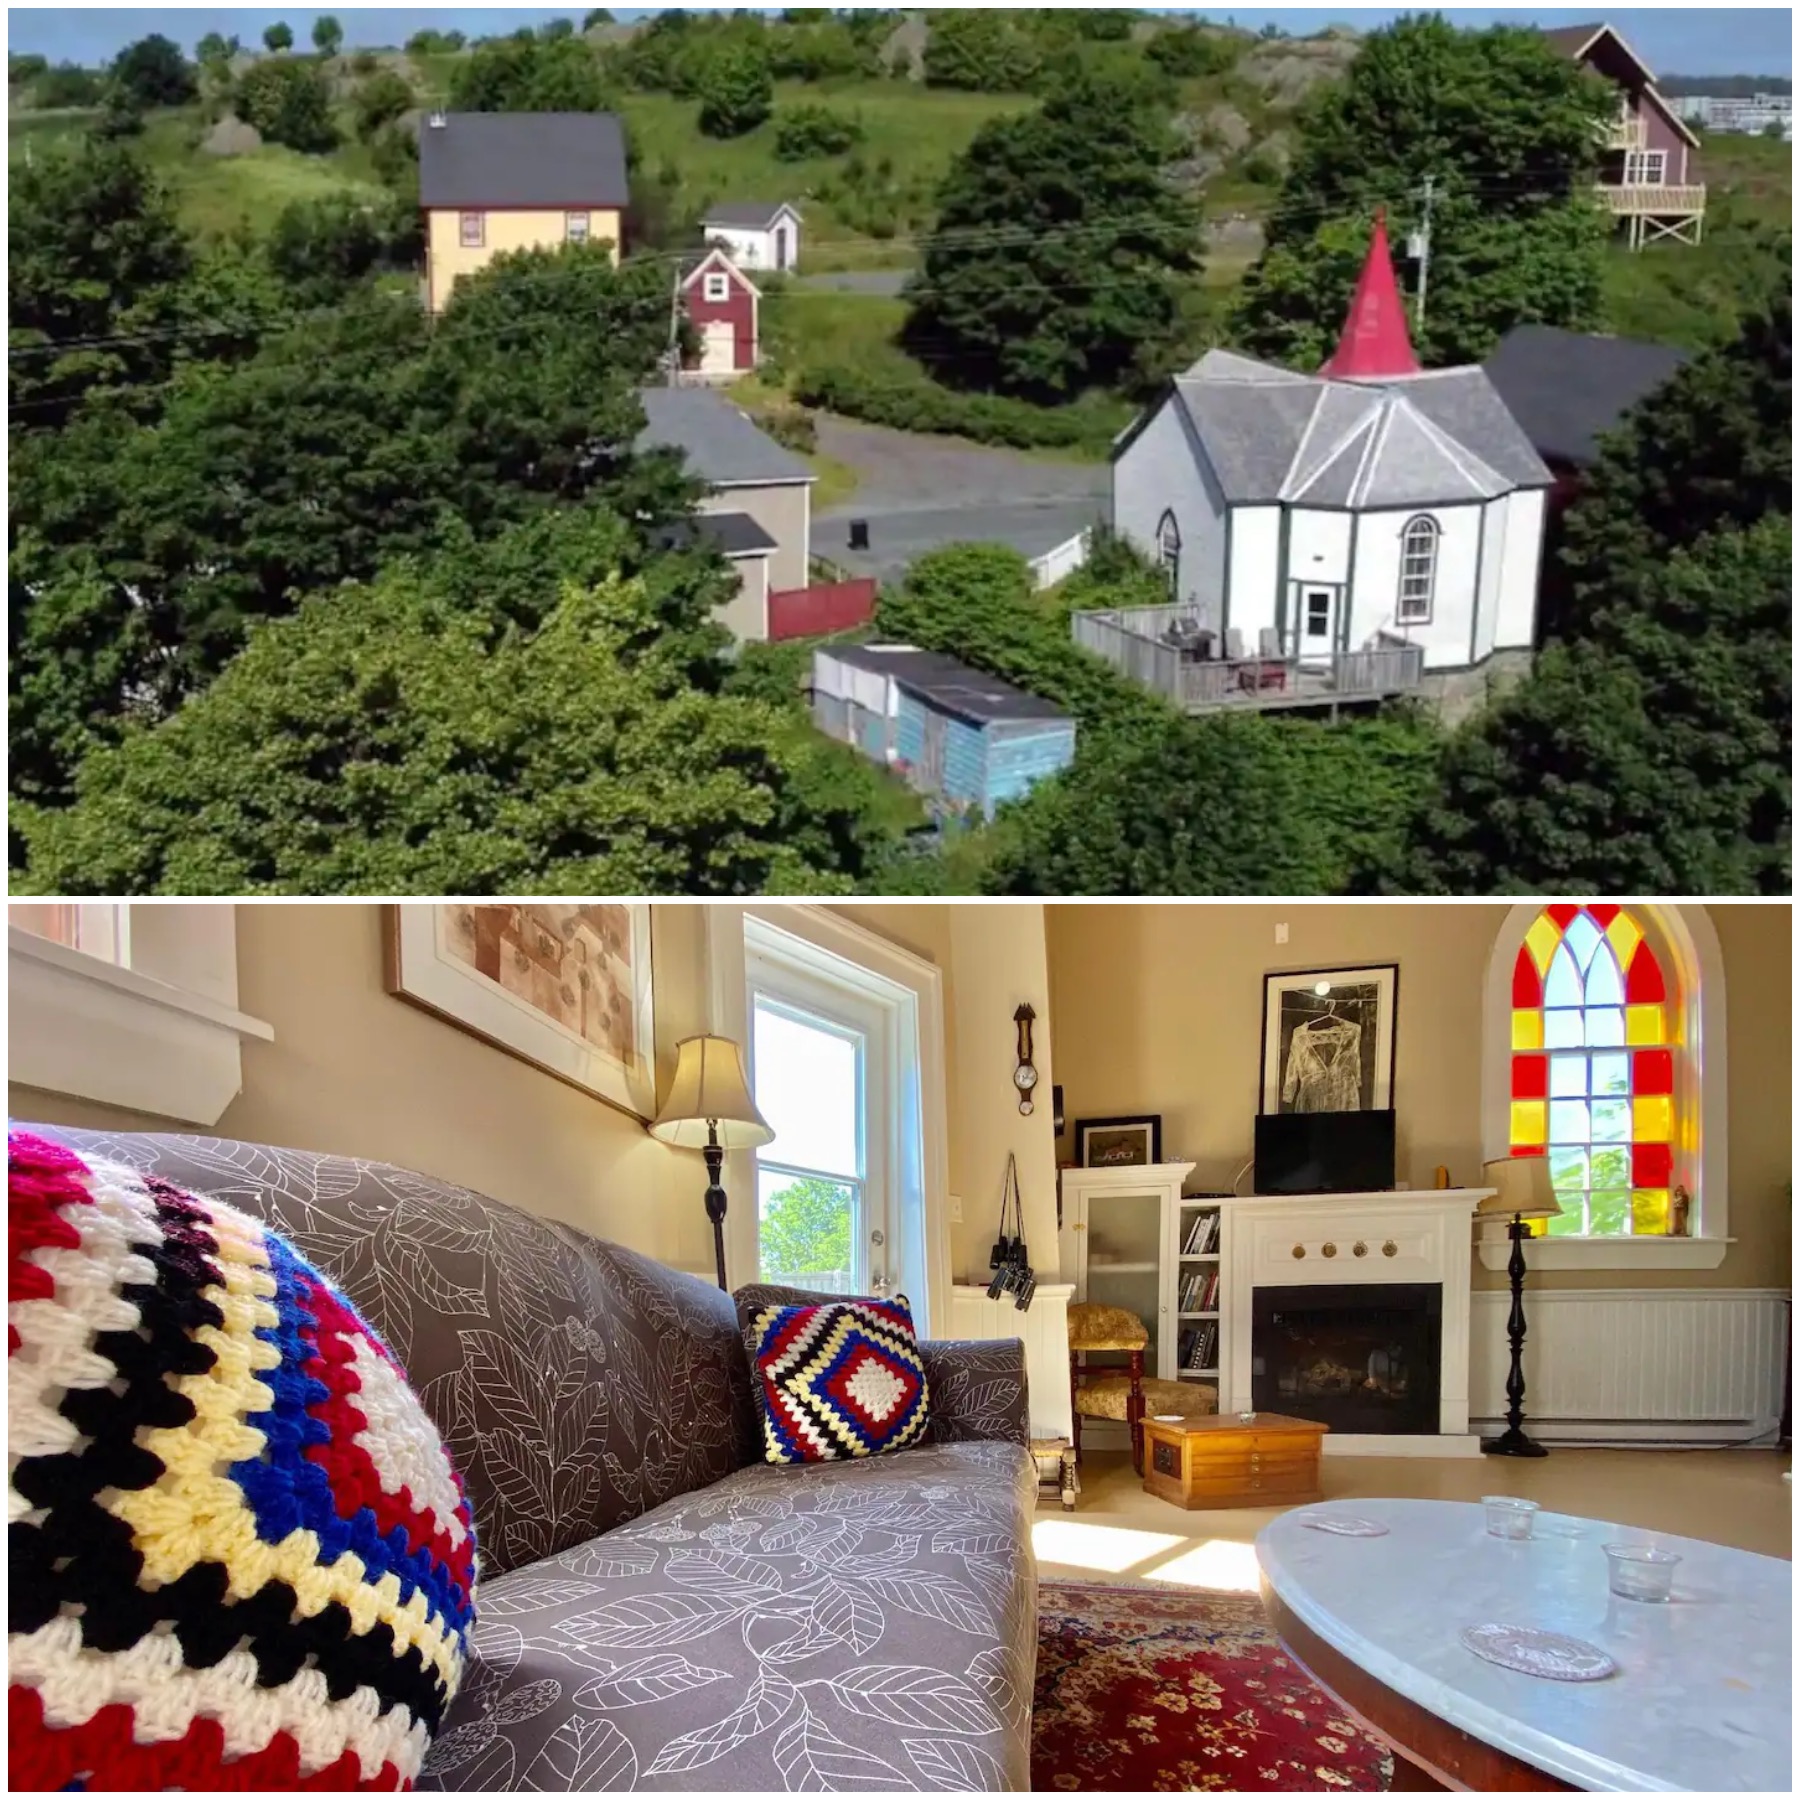 You are currently viewing Quidi Vidi Vacation Rental Inside A Converted Church